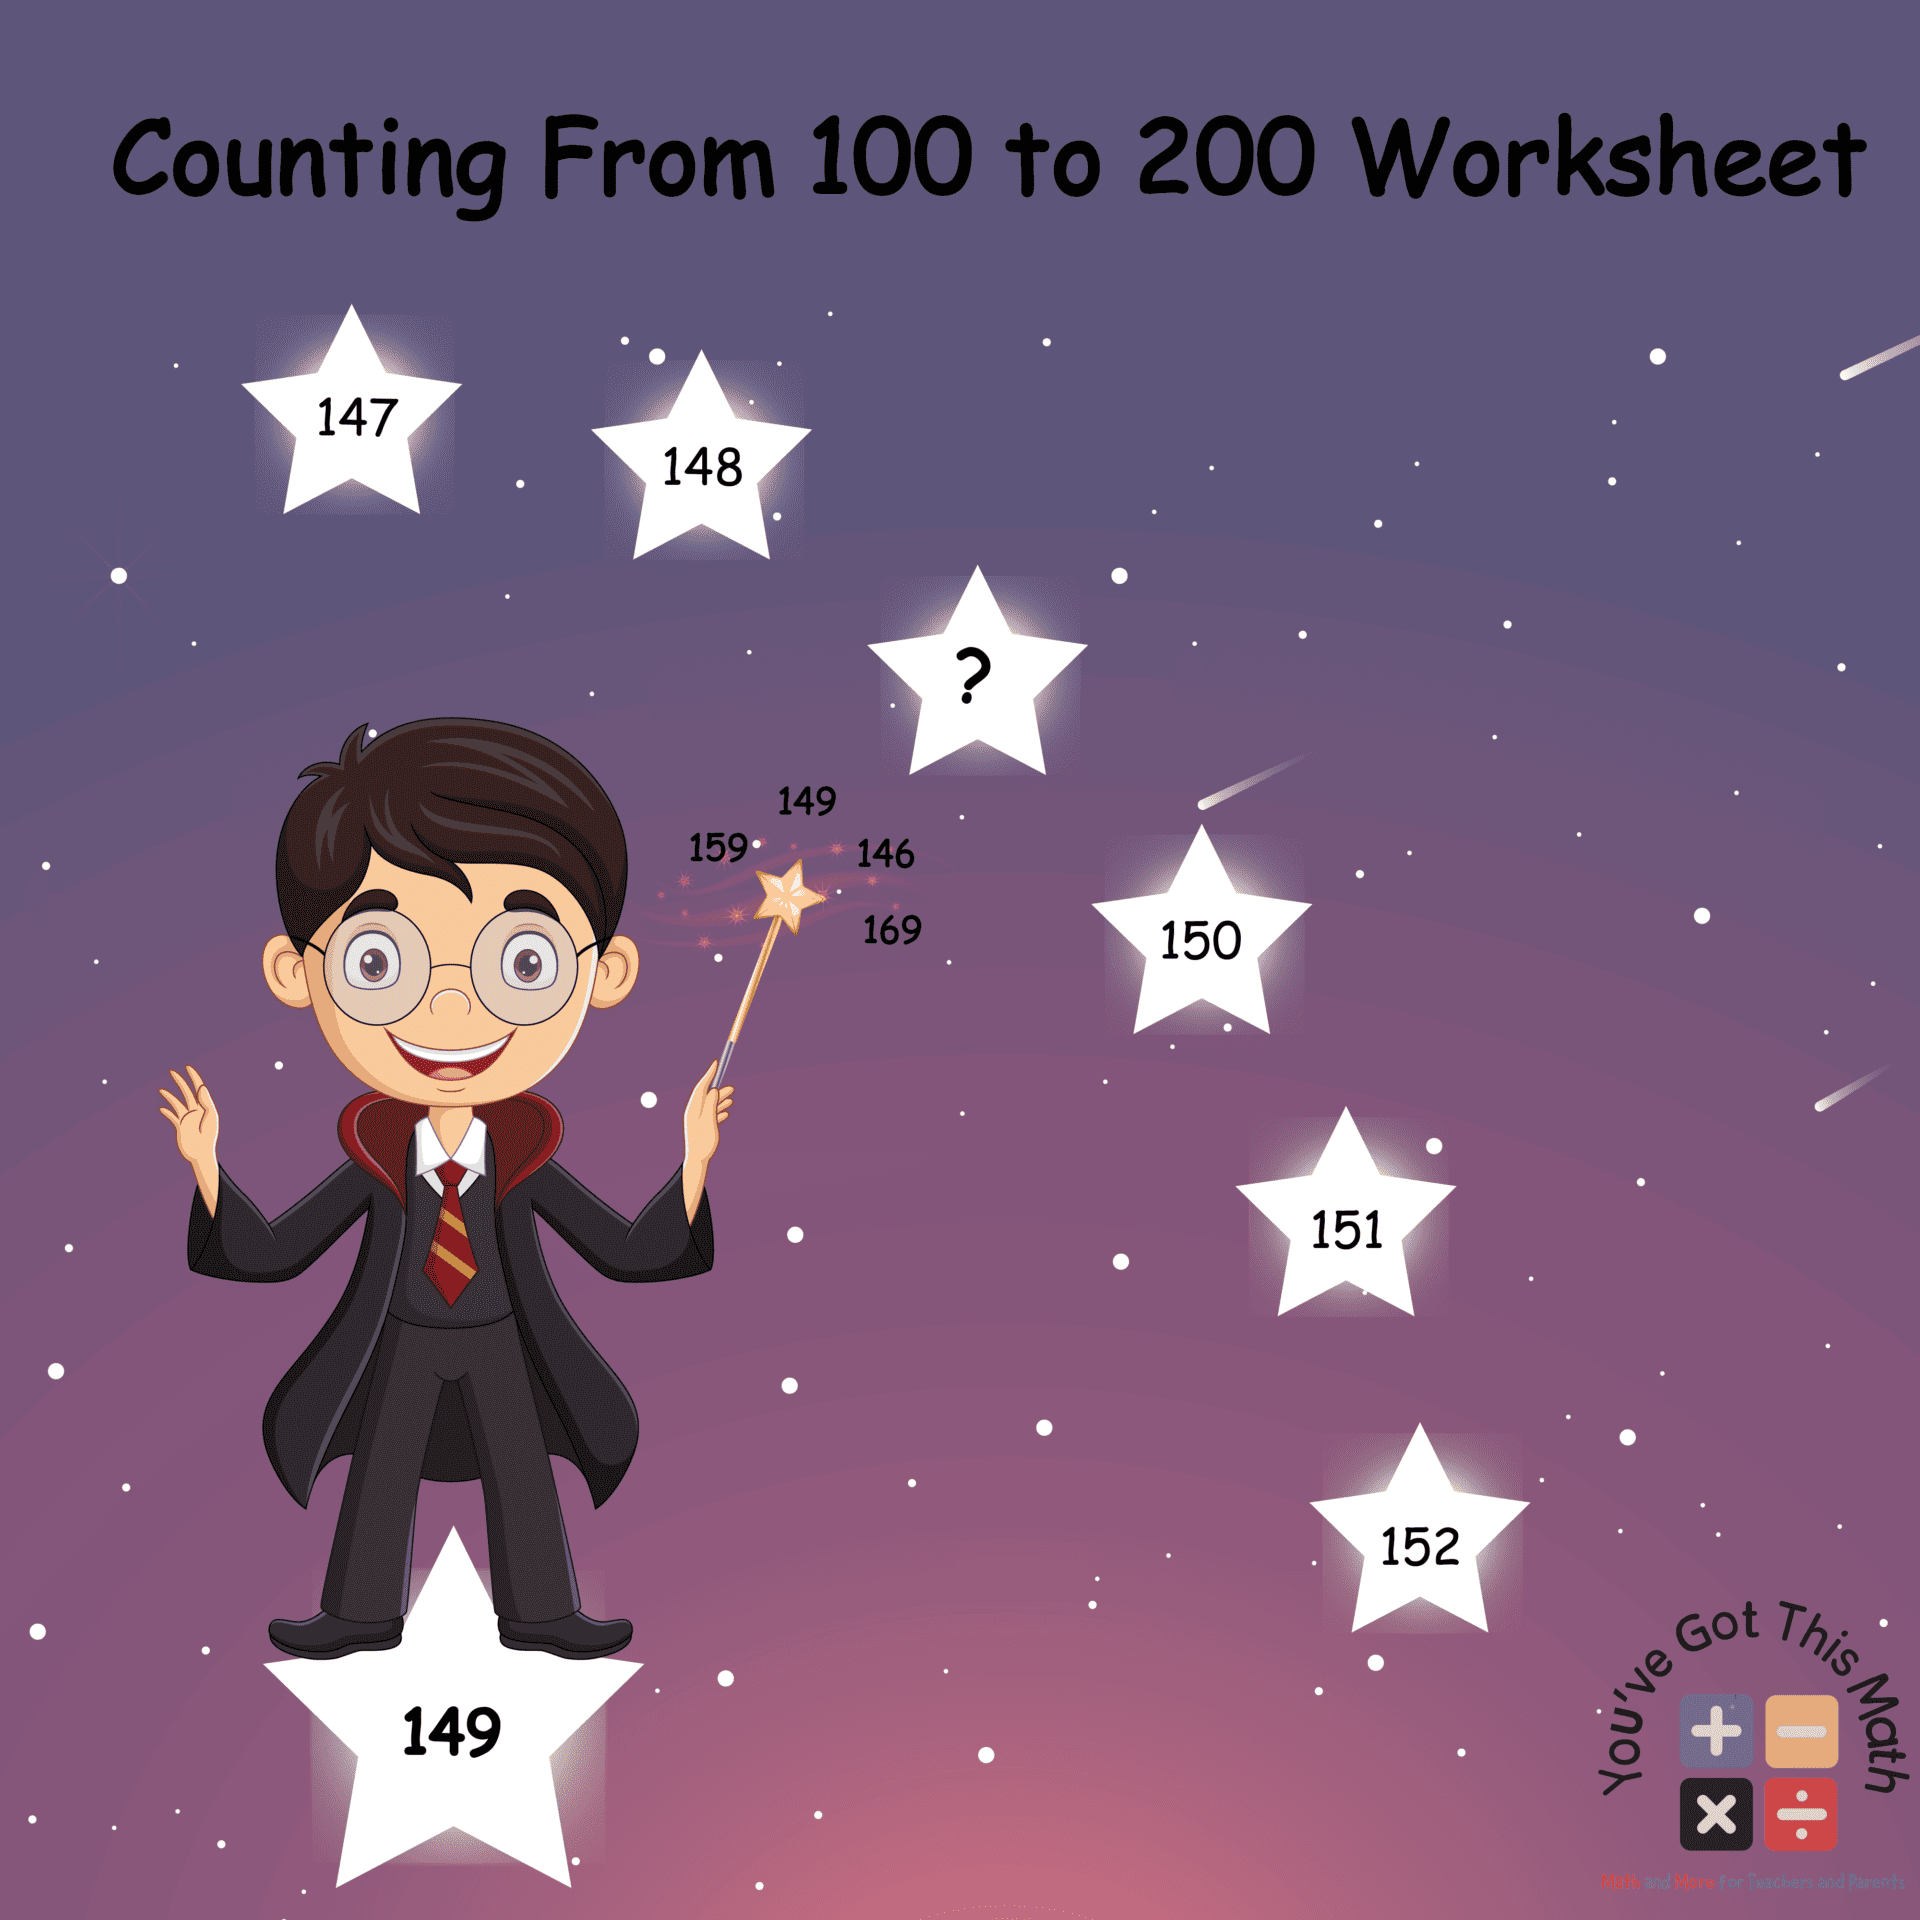 Counting From 100 to 200 Worksheet